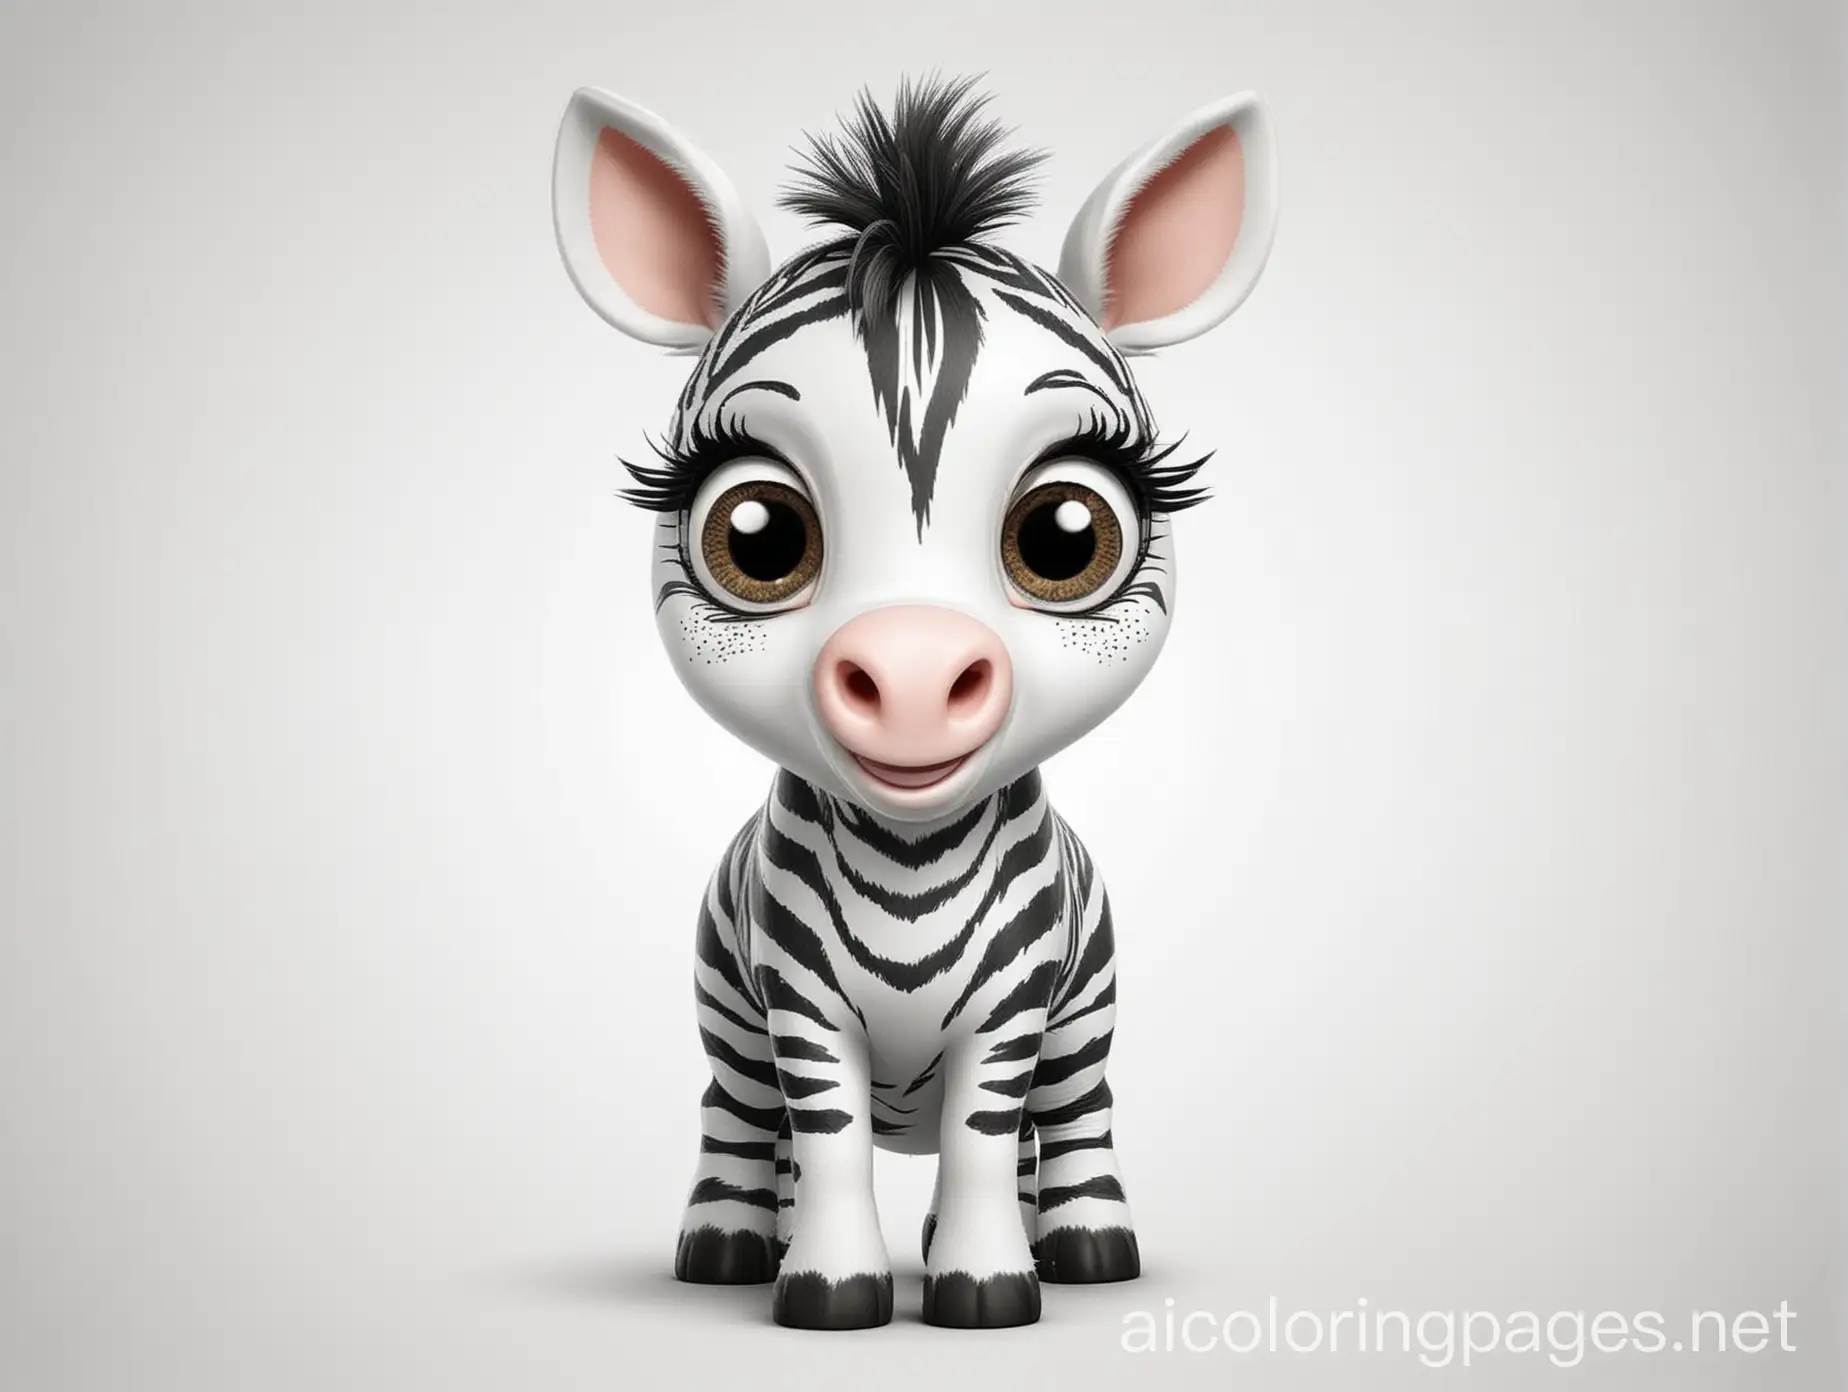 a cute happy zebra, big eyes, white background, basic lines, cartoon style, Coloring Page, black and white, line art, white background, Simplicity, Ample White Space. The background of the coloring page is plain white to make it easy for young children to color within the lines. The outlines of all the subjects are easy to distinguish, making it simple for kids to color without too much difficulty